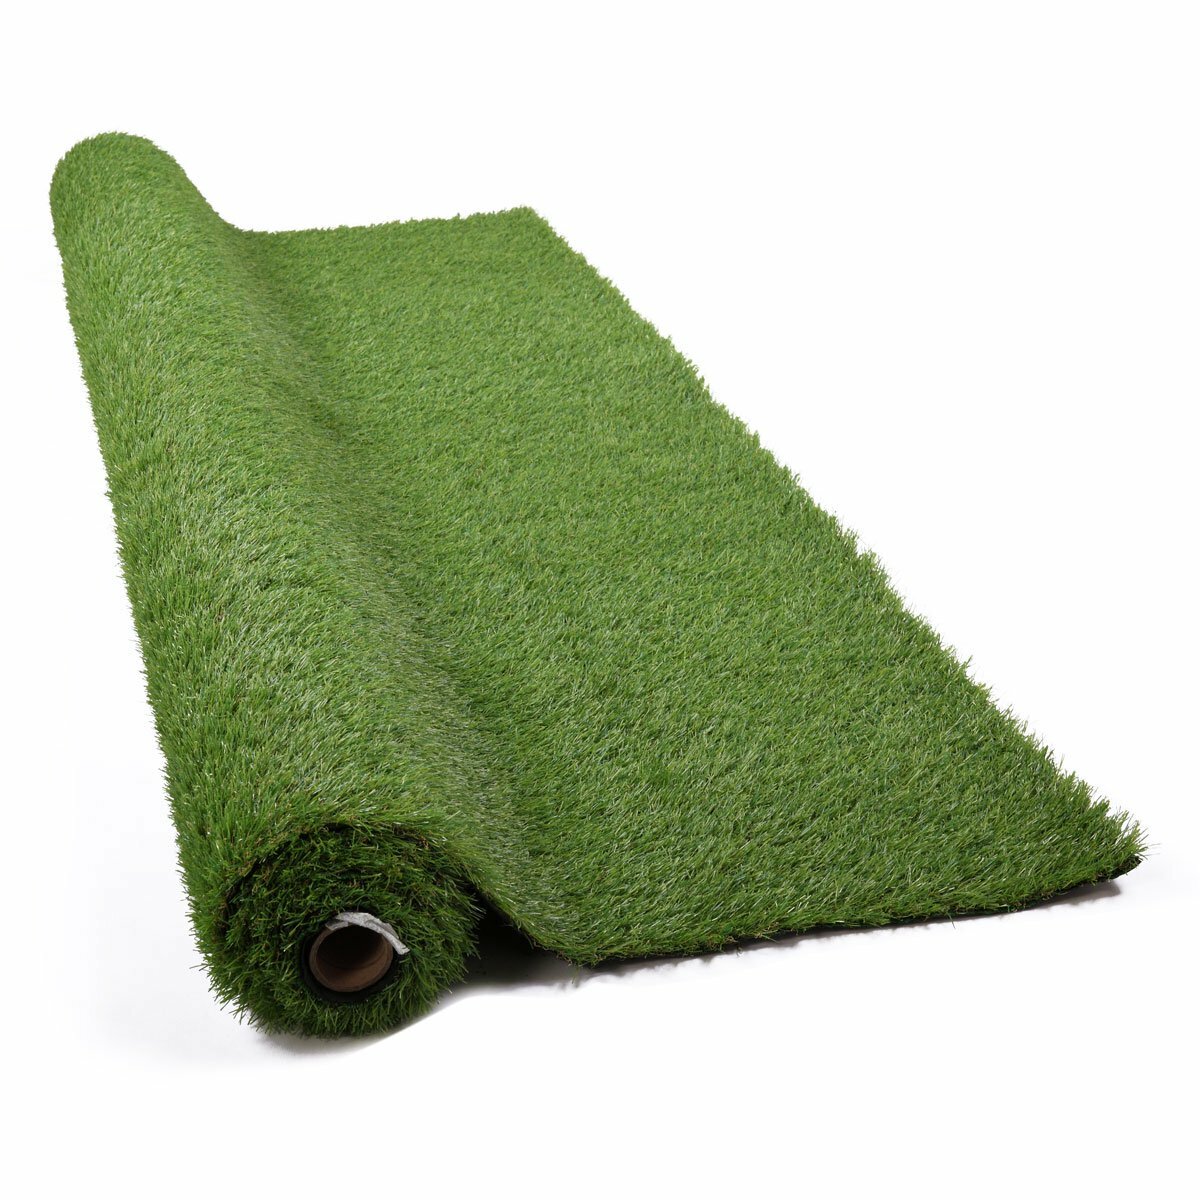 1.6x6.6FT/ 6.6x9.8FT Artificial Grass Turf Pet 3cm Thick Floor Mat Lawn Synthetic Spring Grass Indoo